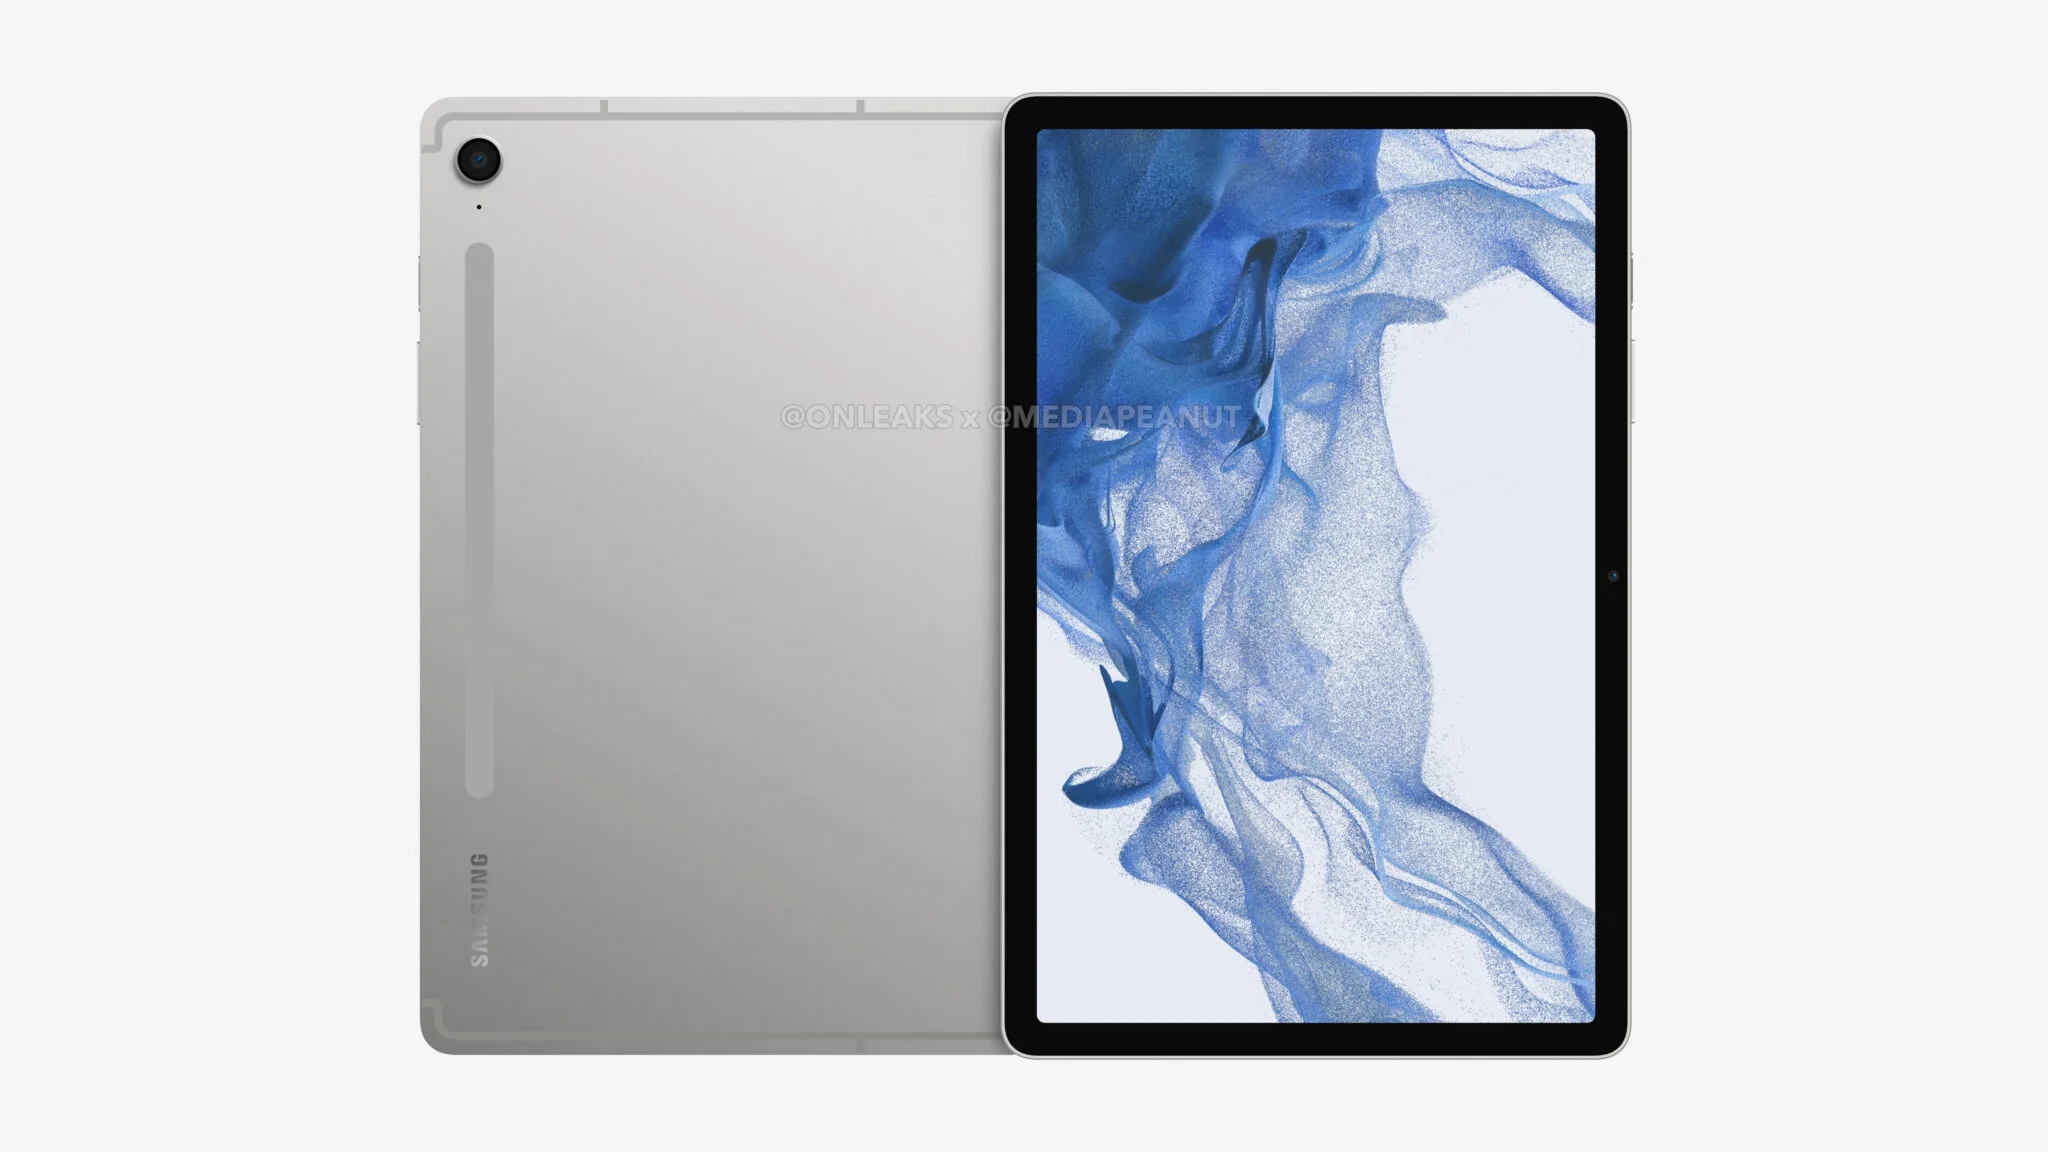 Here's what the Galaxy Tab S9 FE will look like: a tablet with an Exynos 1380 chip, a 10.9-inch screen and stereo speakers